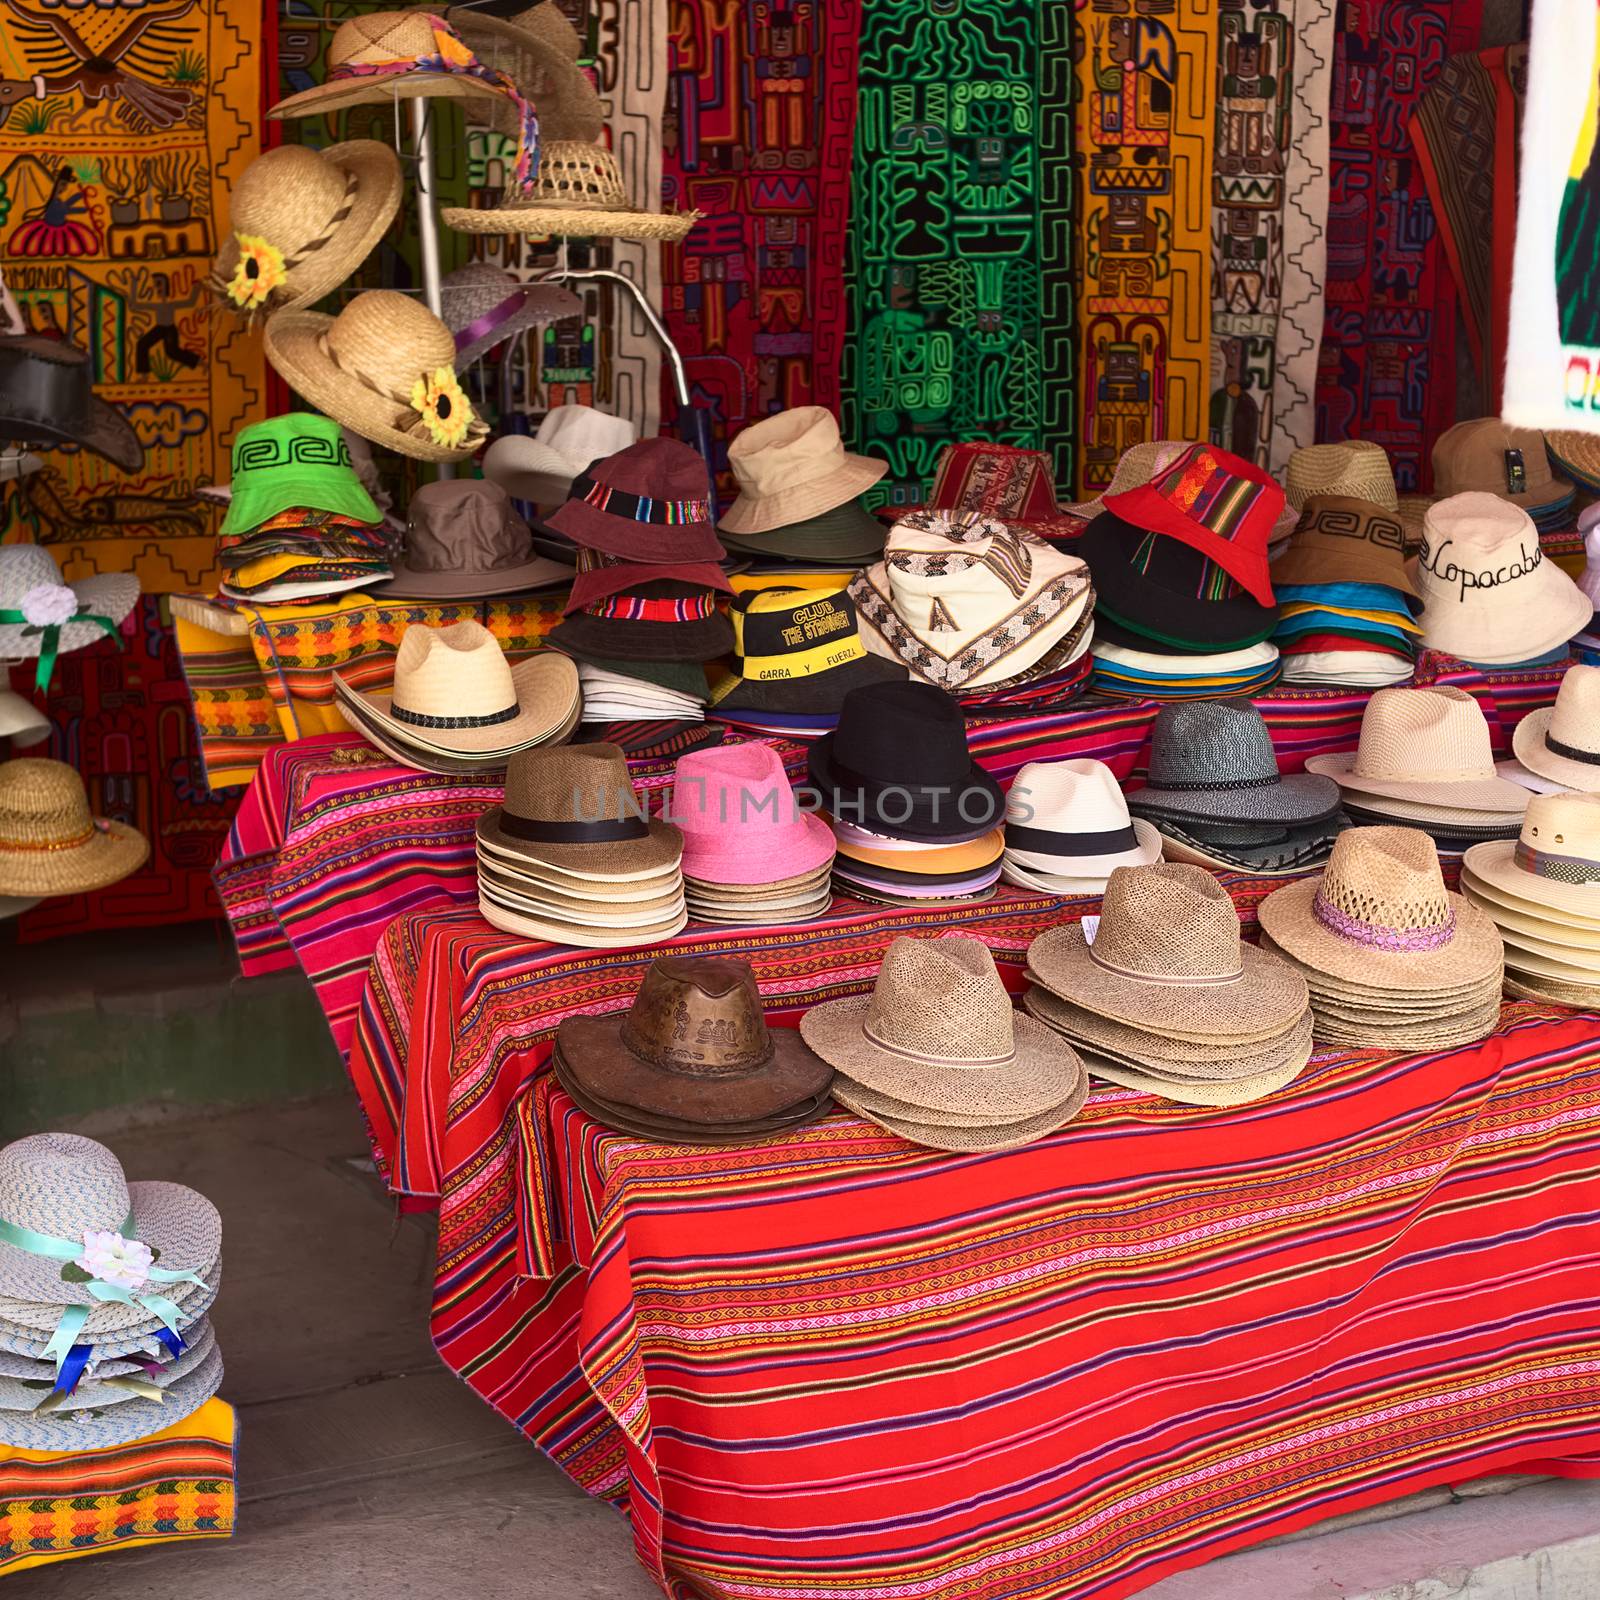 COPACABANA, BOLIVIA - OCTOBER 19, 2014: Big variety of hats outside a souvenir and handicraft shop in the small tourist town on the shore of Lake Titicaca on October 19, 2014 in Copacabana, Bolivia.  